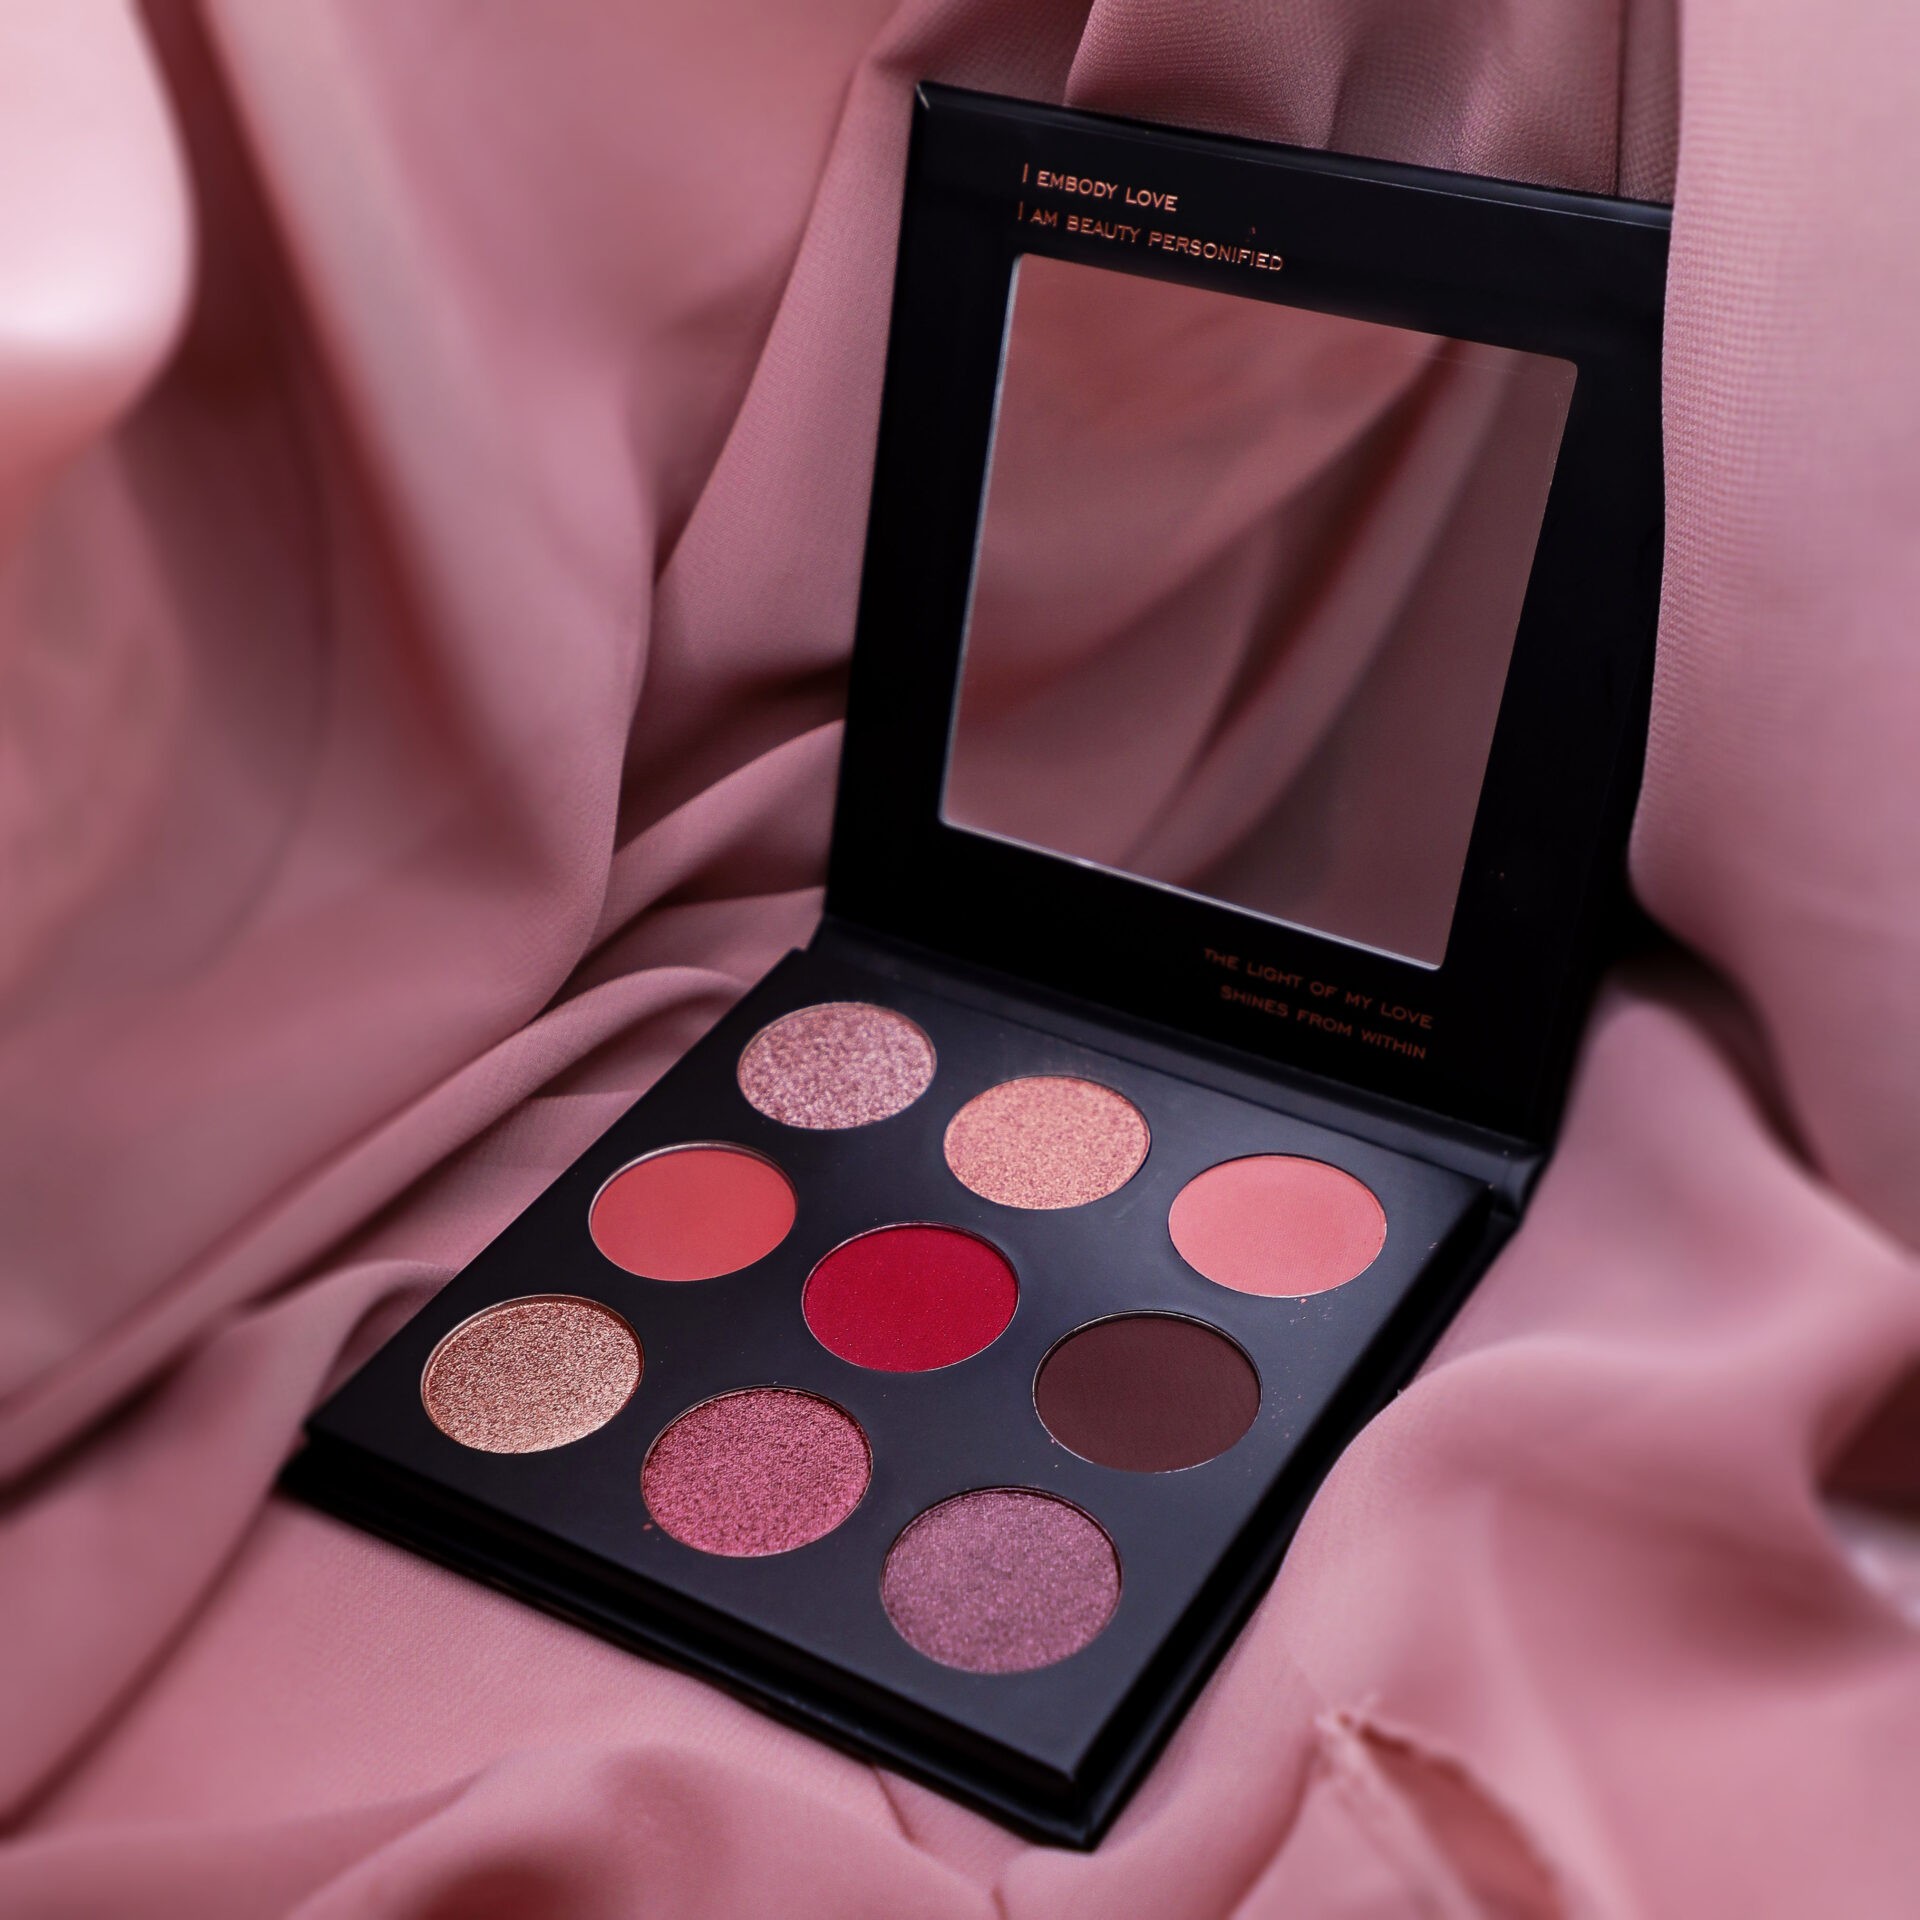 Sage Goddess Aphrodite's Eyeshadow Palette for love and beauty